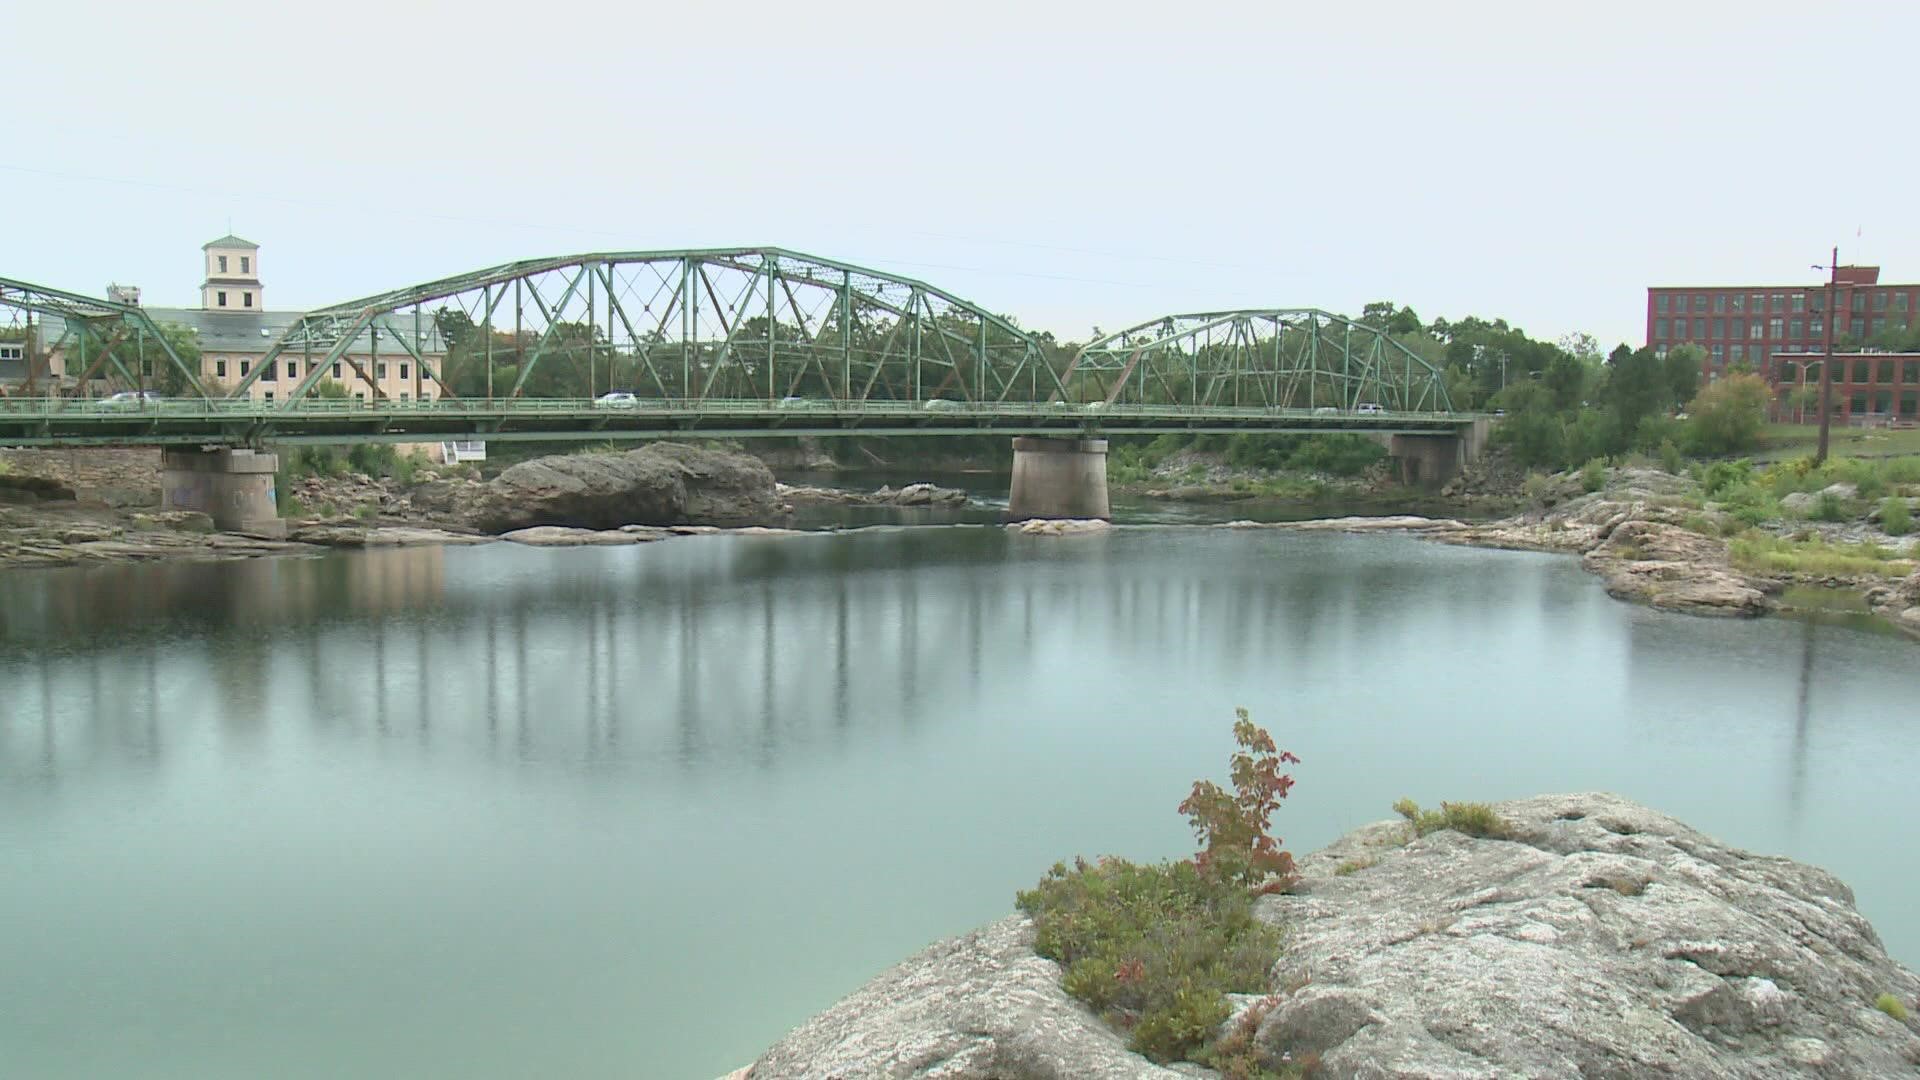 Maine DOT said the bridge, which connects Brunswick to Topsham, can no longer support vehicles weighing more than 10 tons.